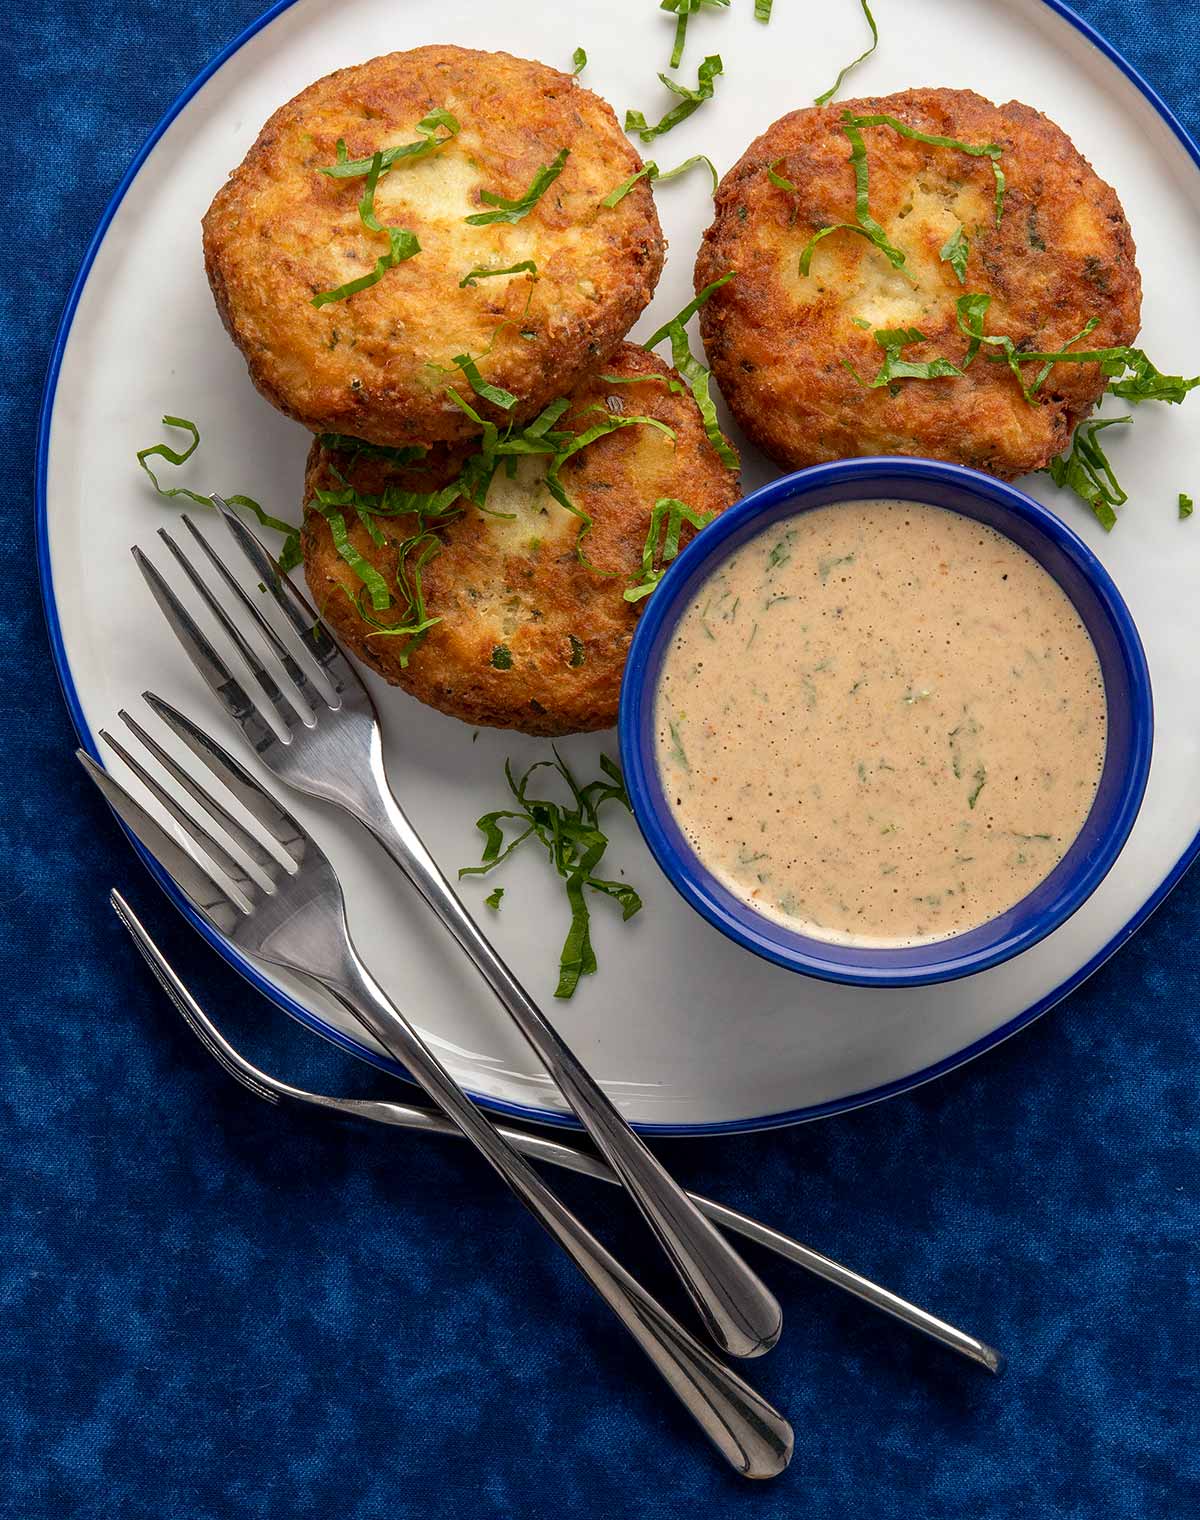 Three potato fish cakes on a plate with remoulade sauce.